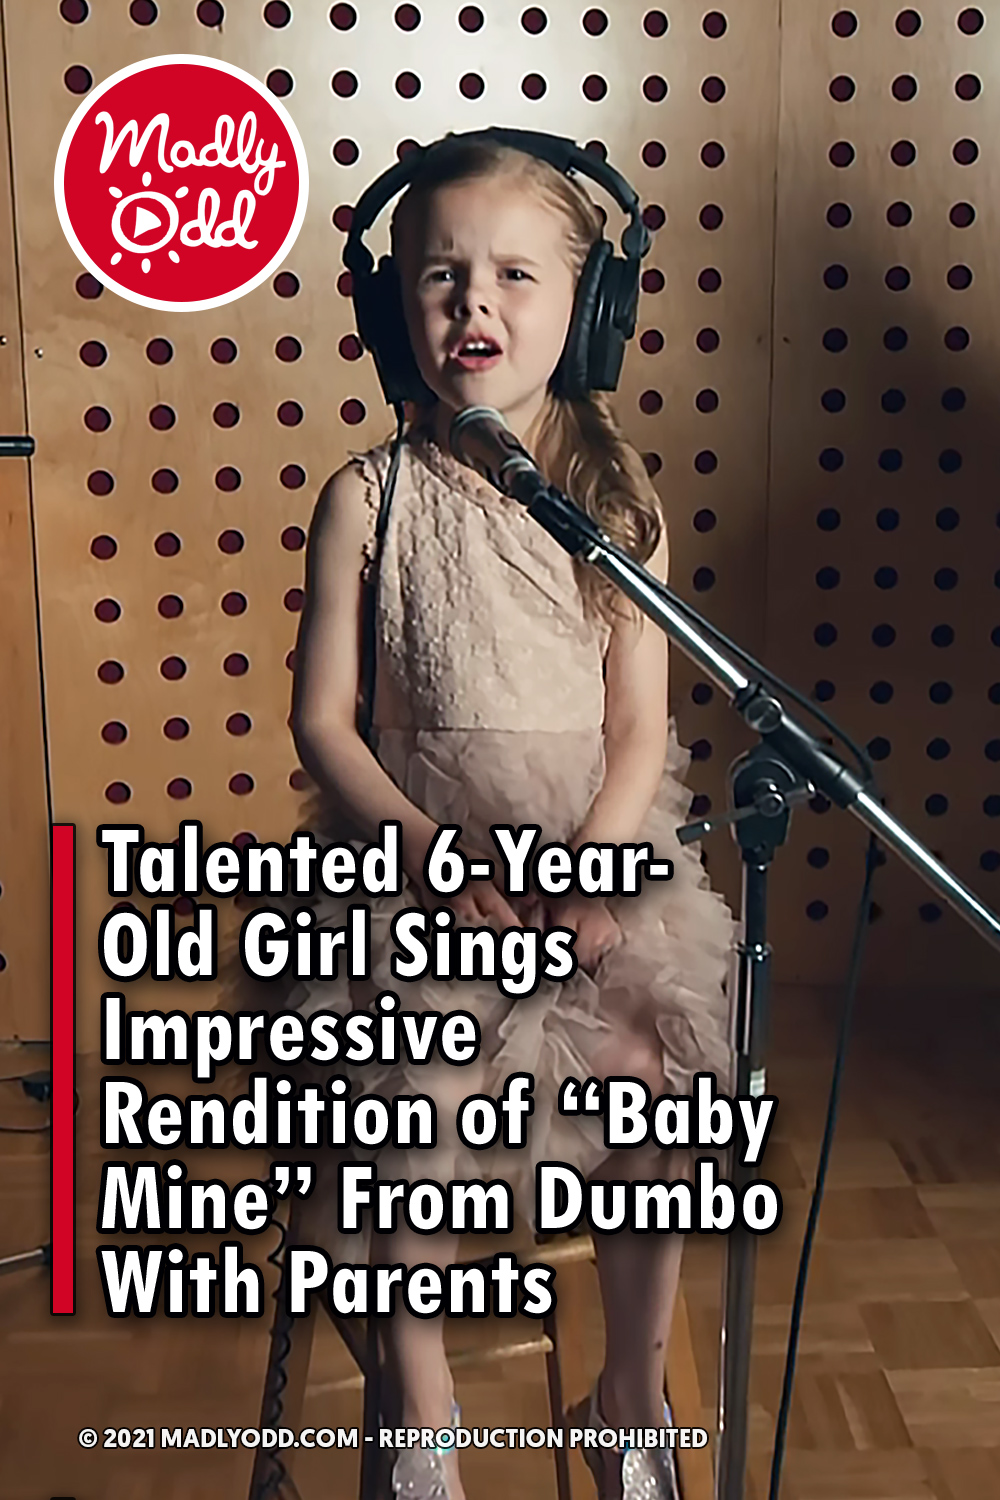 Talented 6-Year-Old Girl Sings Impressive Rendition of “Baby Mine” From Dumbo With Parents